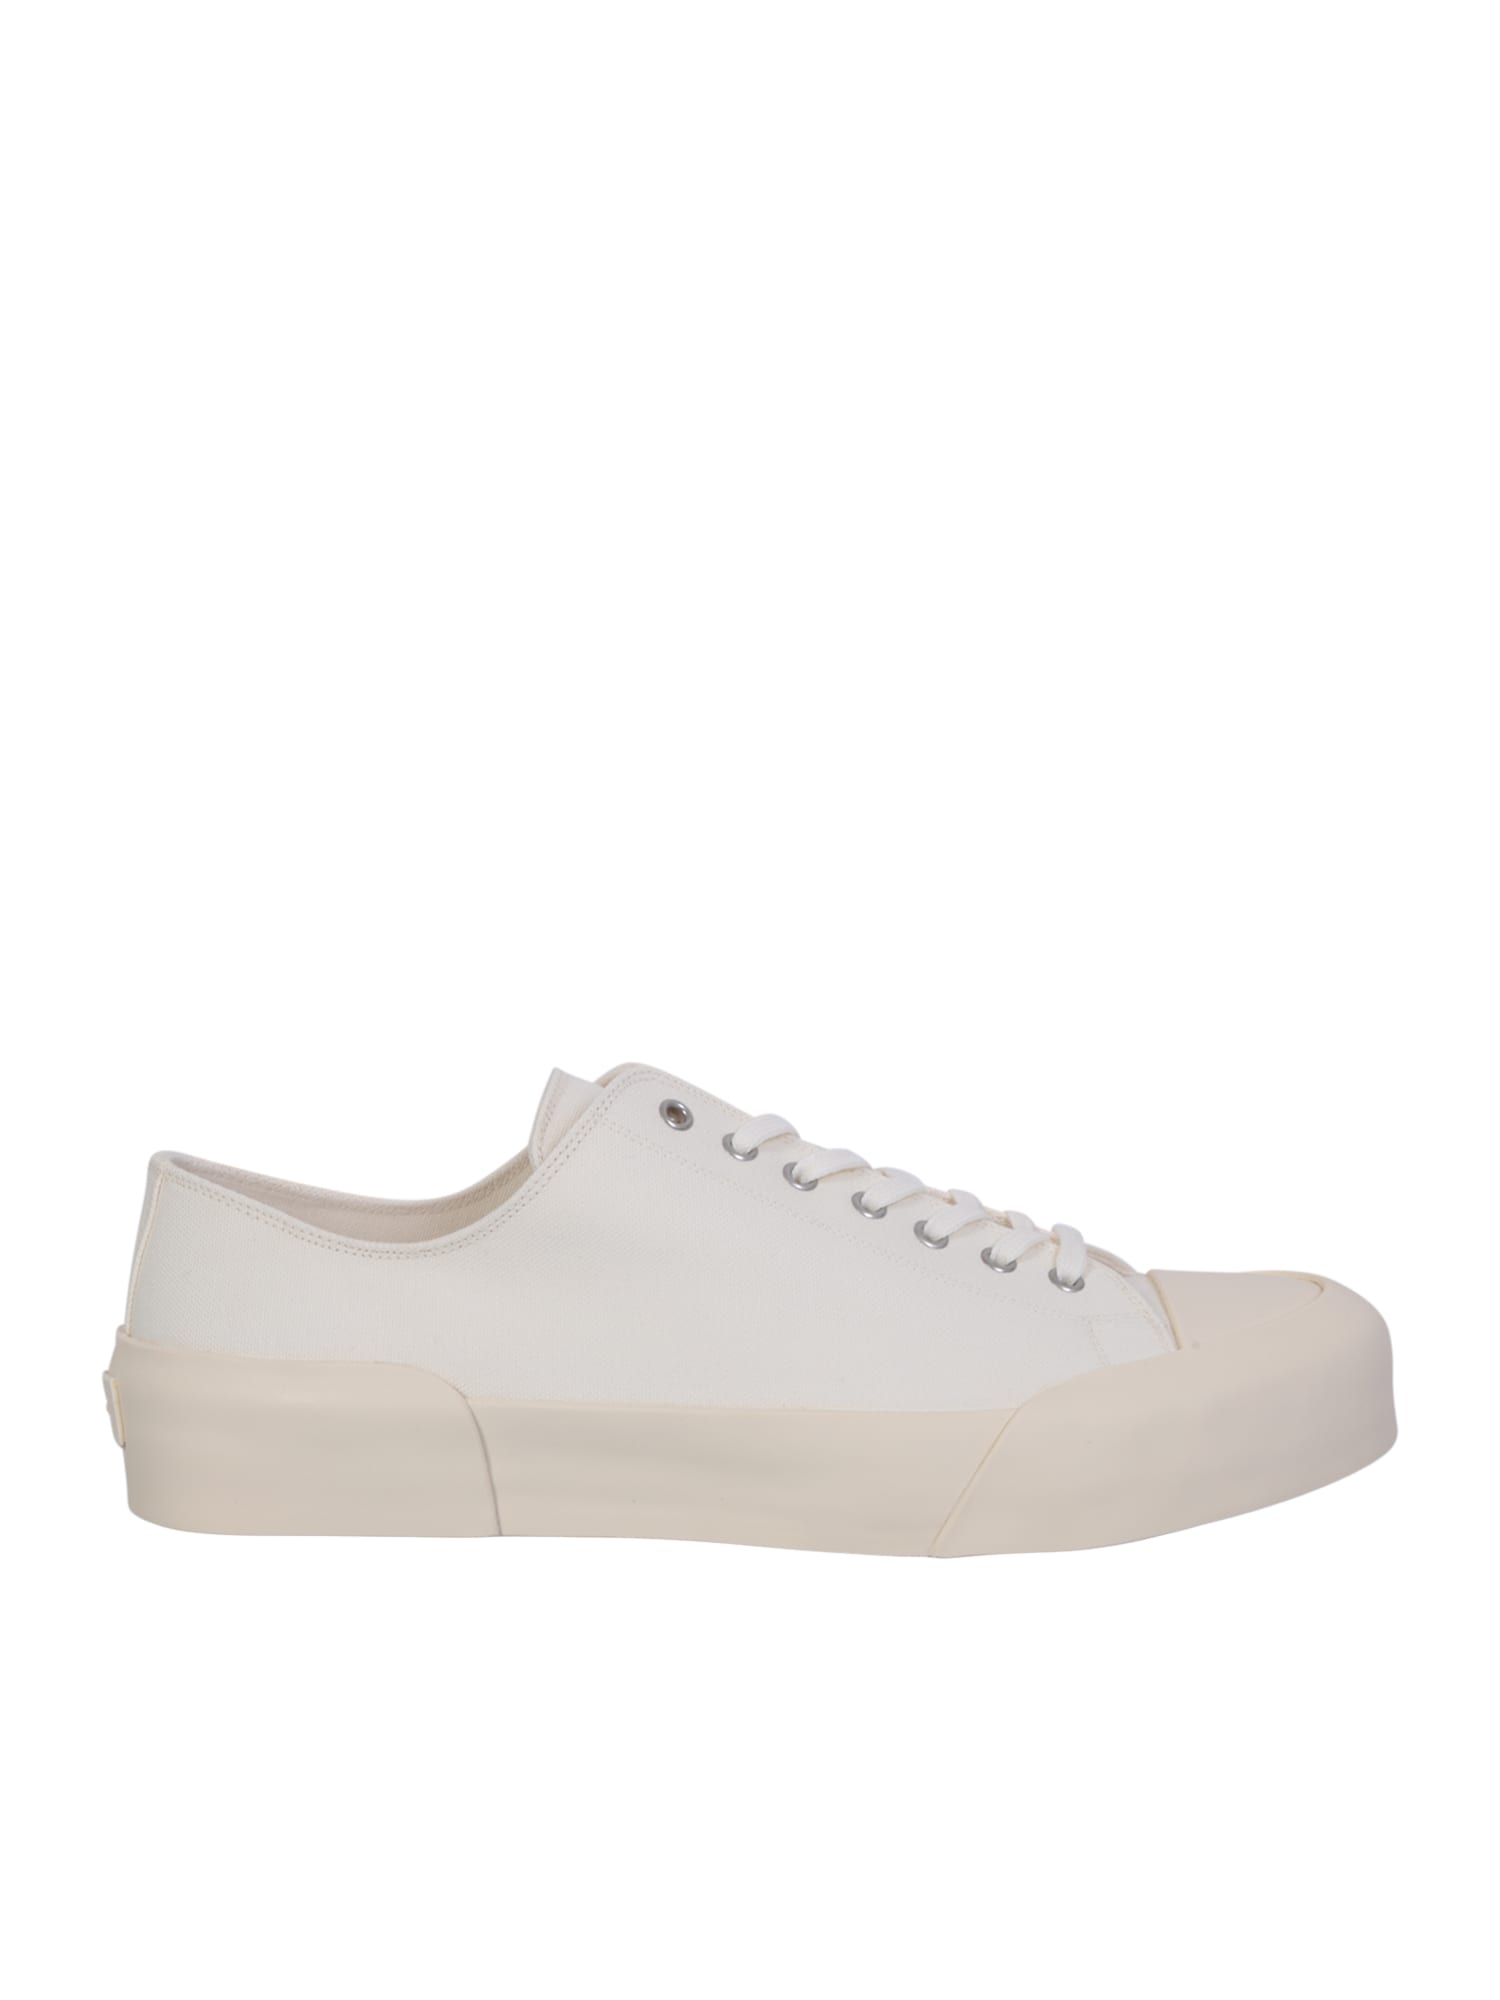 White Lace-up Low Top Sneakers